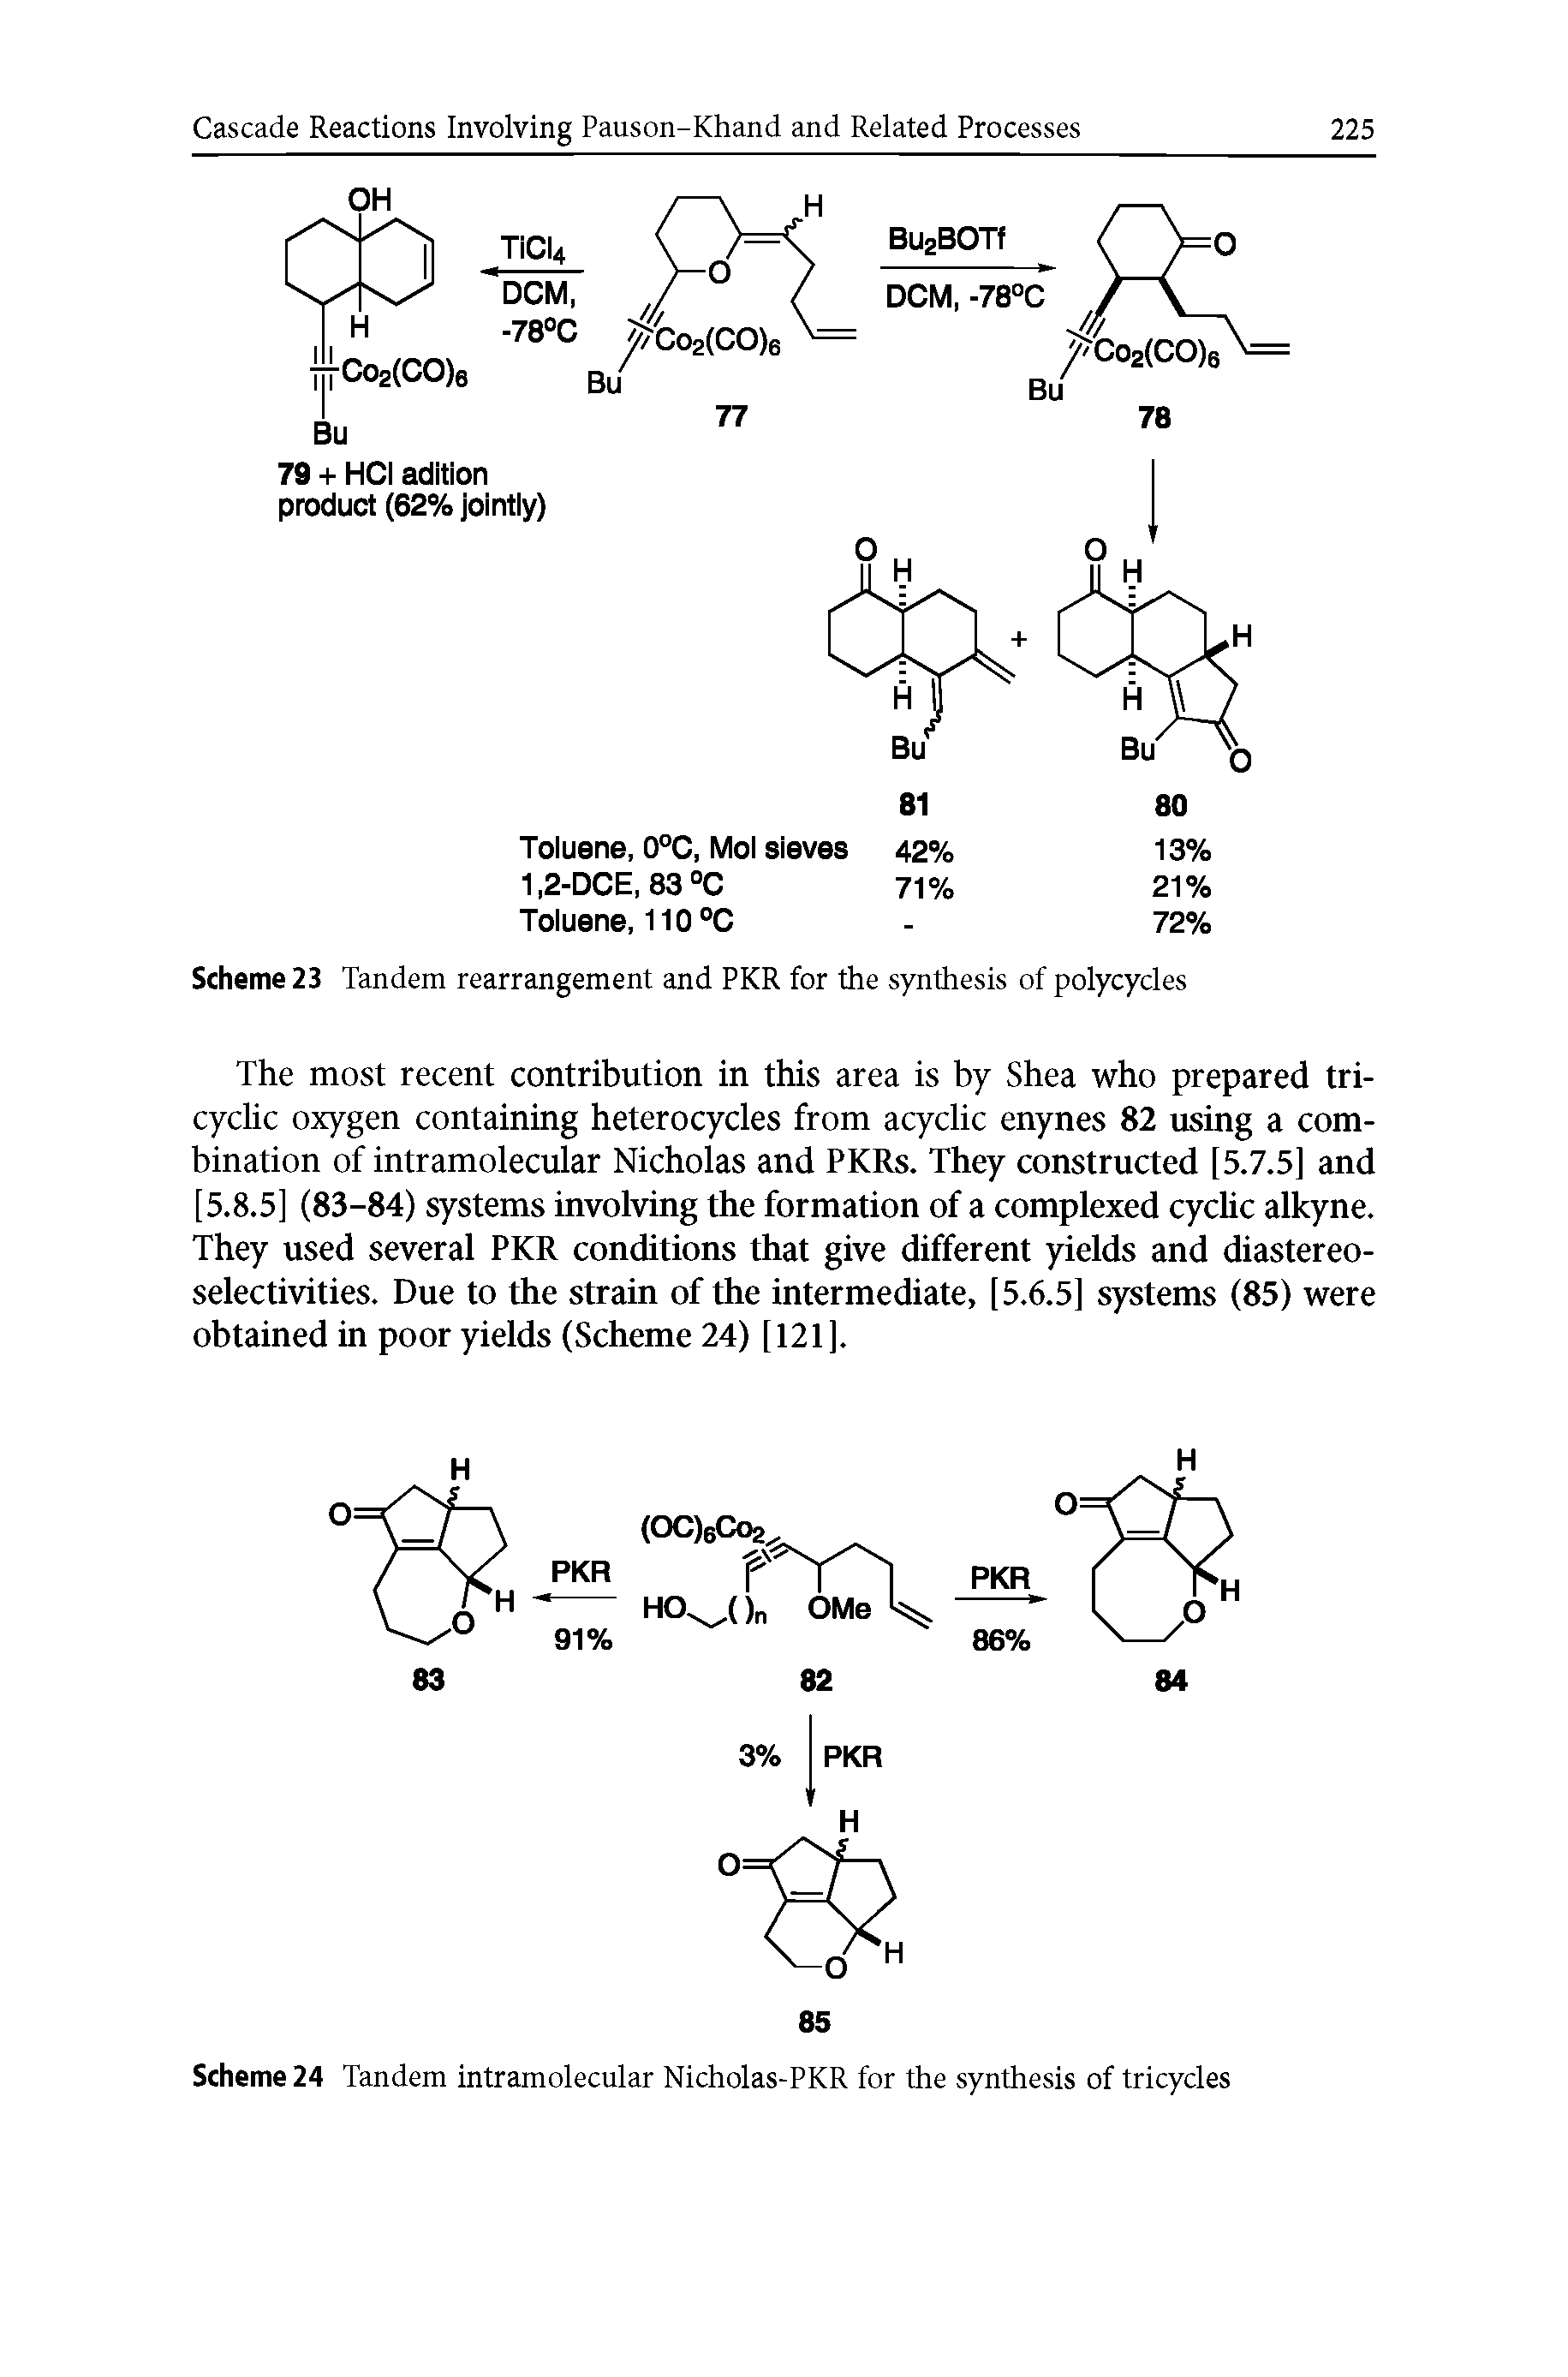 Scheme 24 Tandem intramolecular Nicholas-PKR for the synthesis of tricycles...